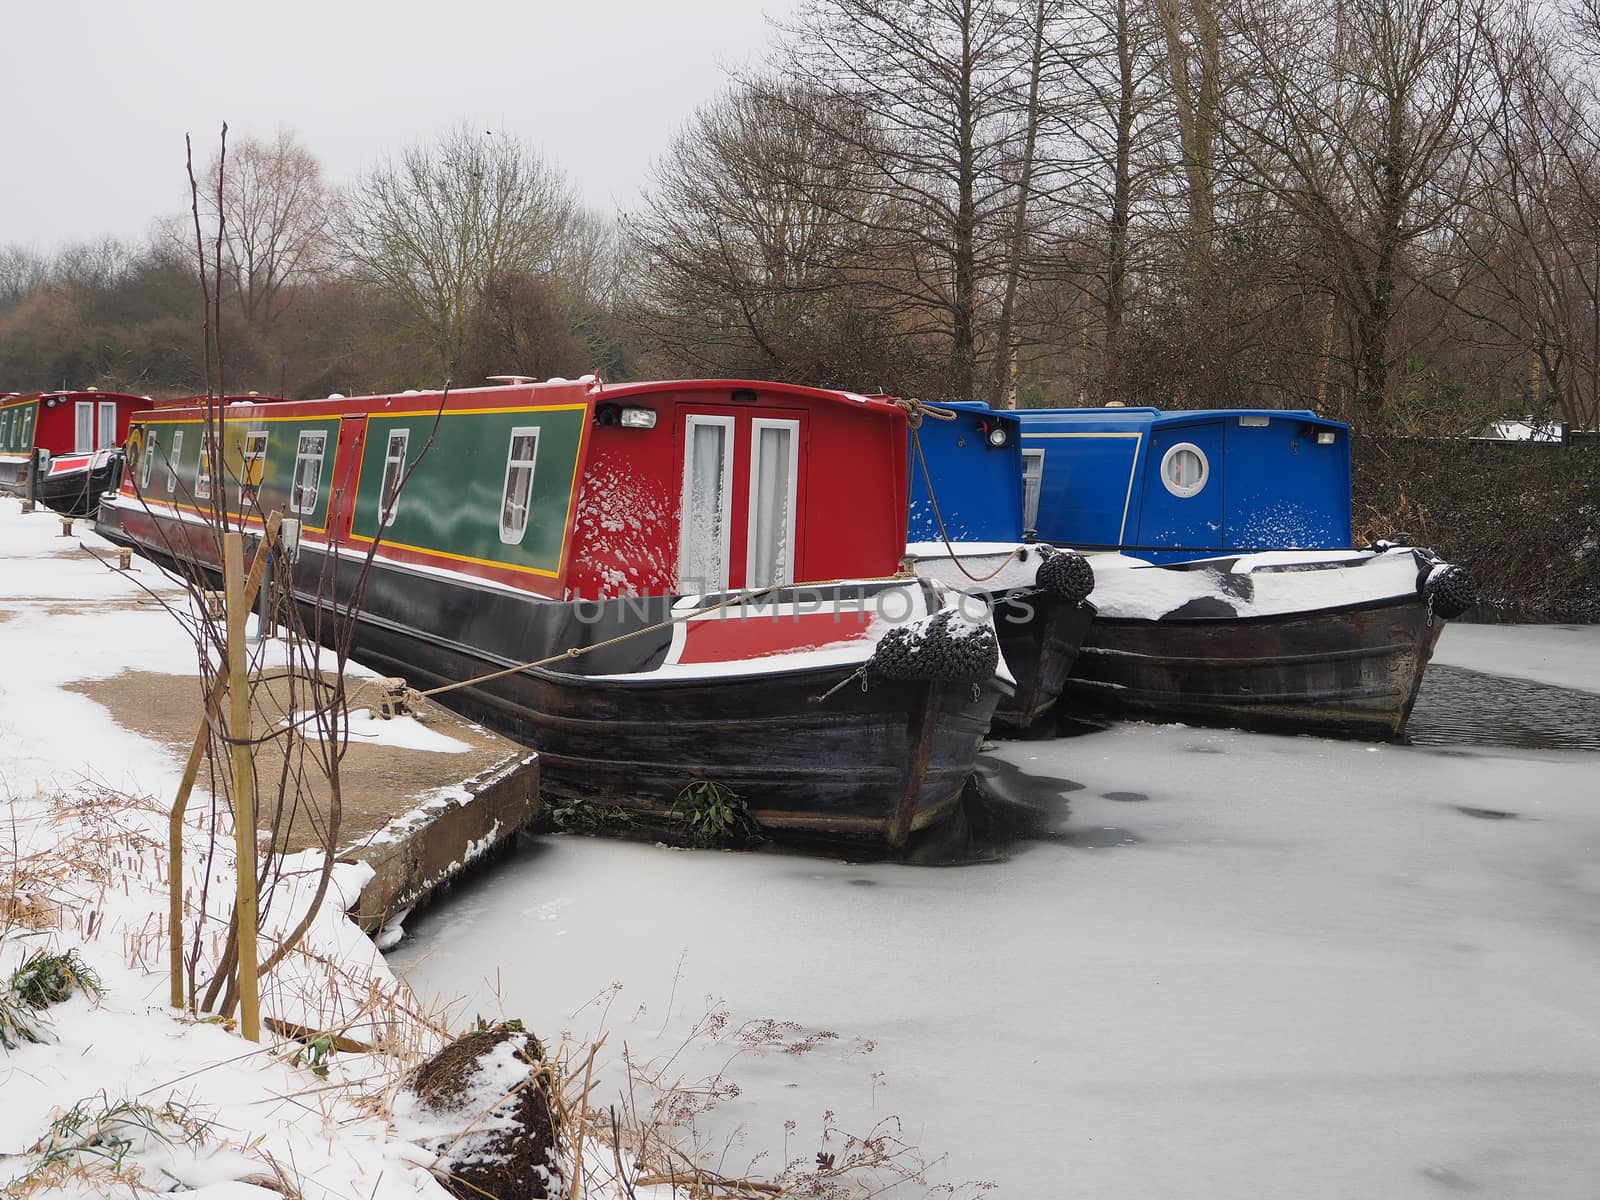 Colorful canal boats moored in icy water during winter snow, Kennet and Avon Canal, Aldermaston, Berkshire, UK